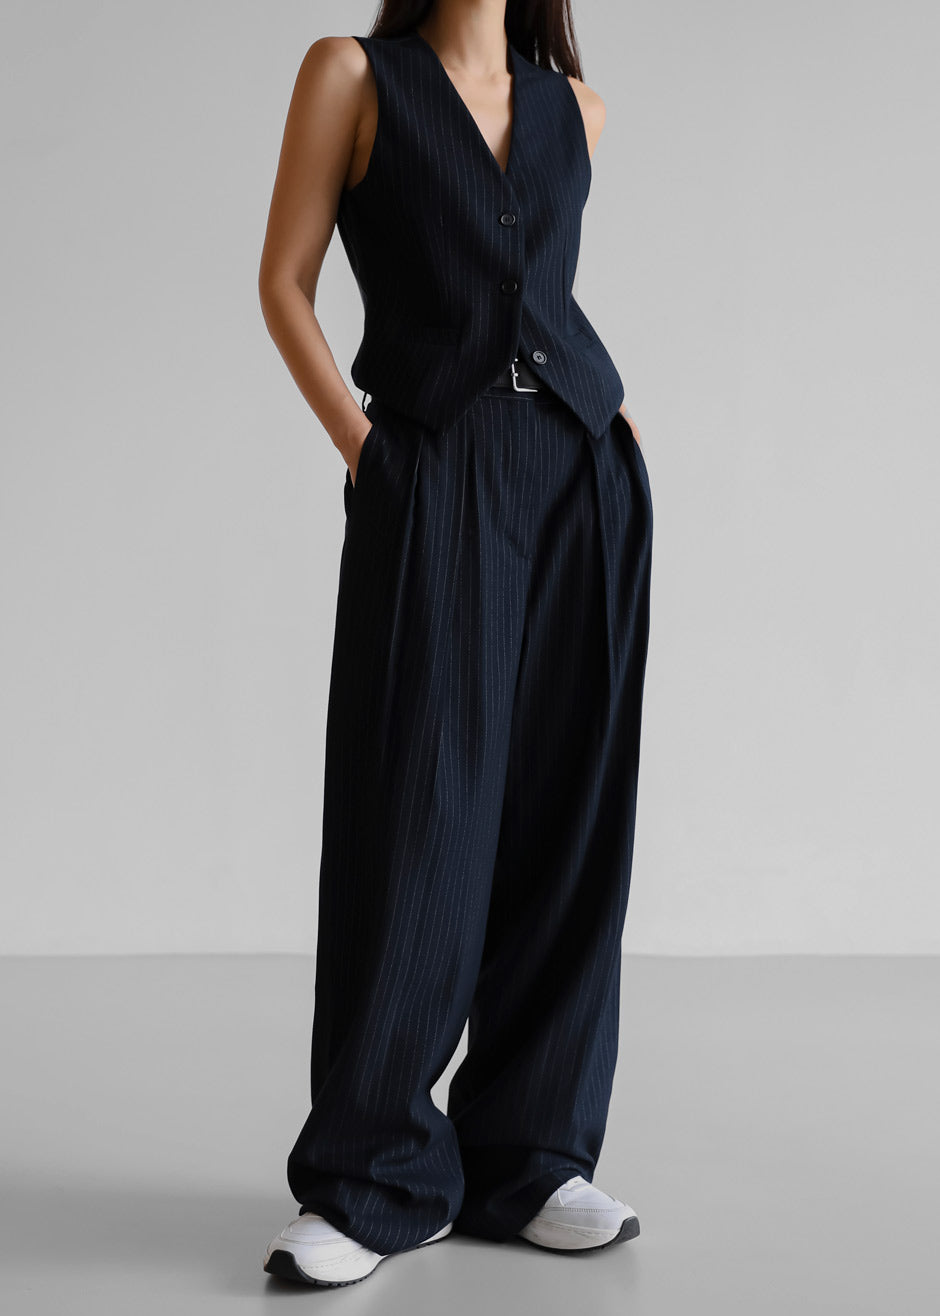 Tansy Tailored Vest - Navy Pinstripe - 10